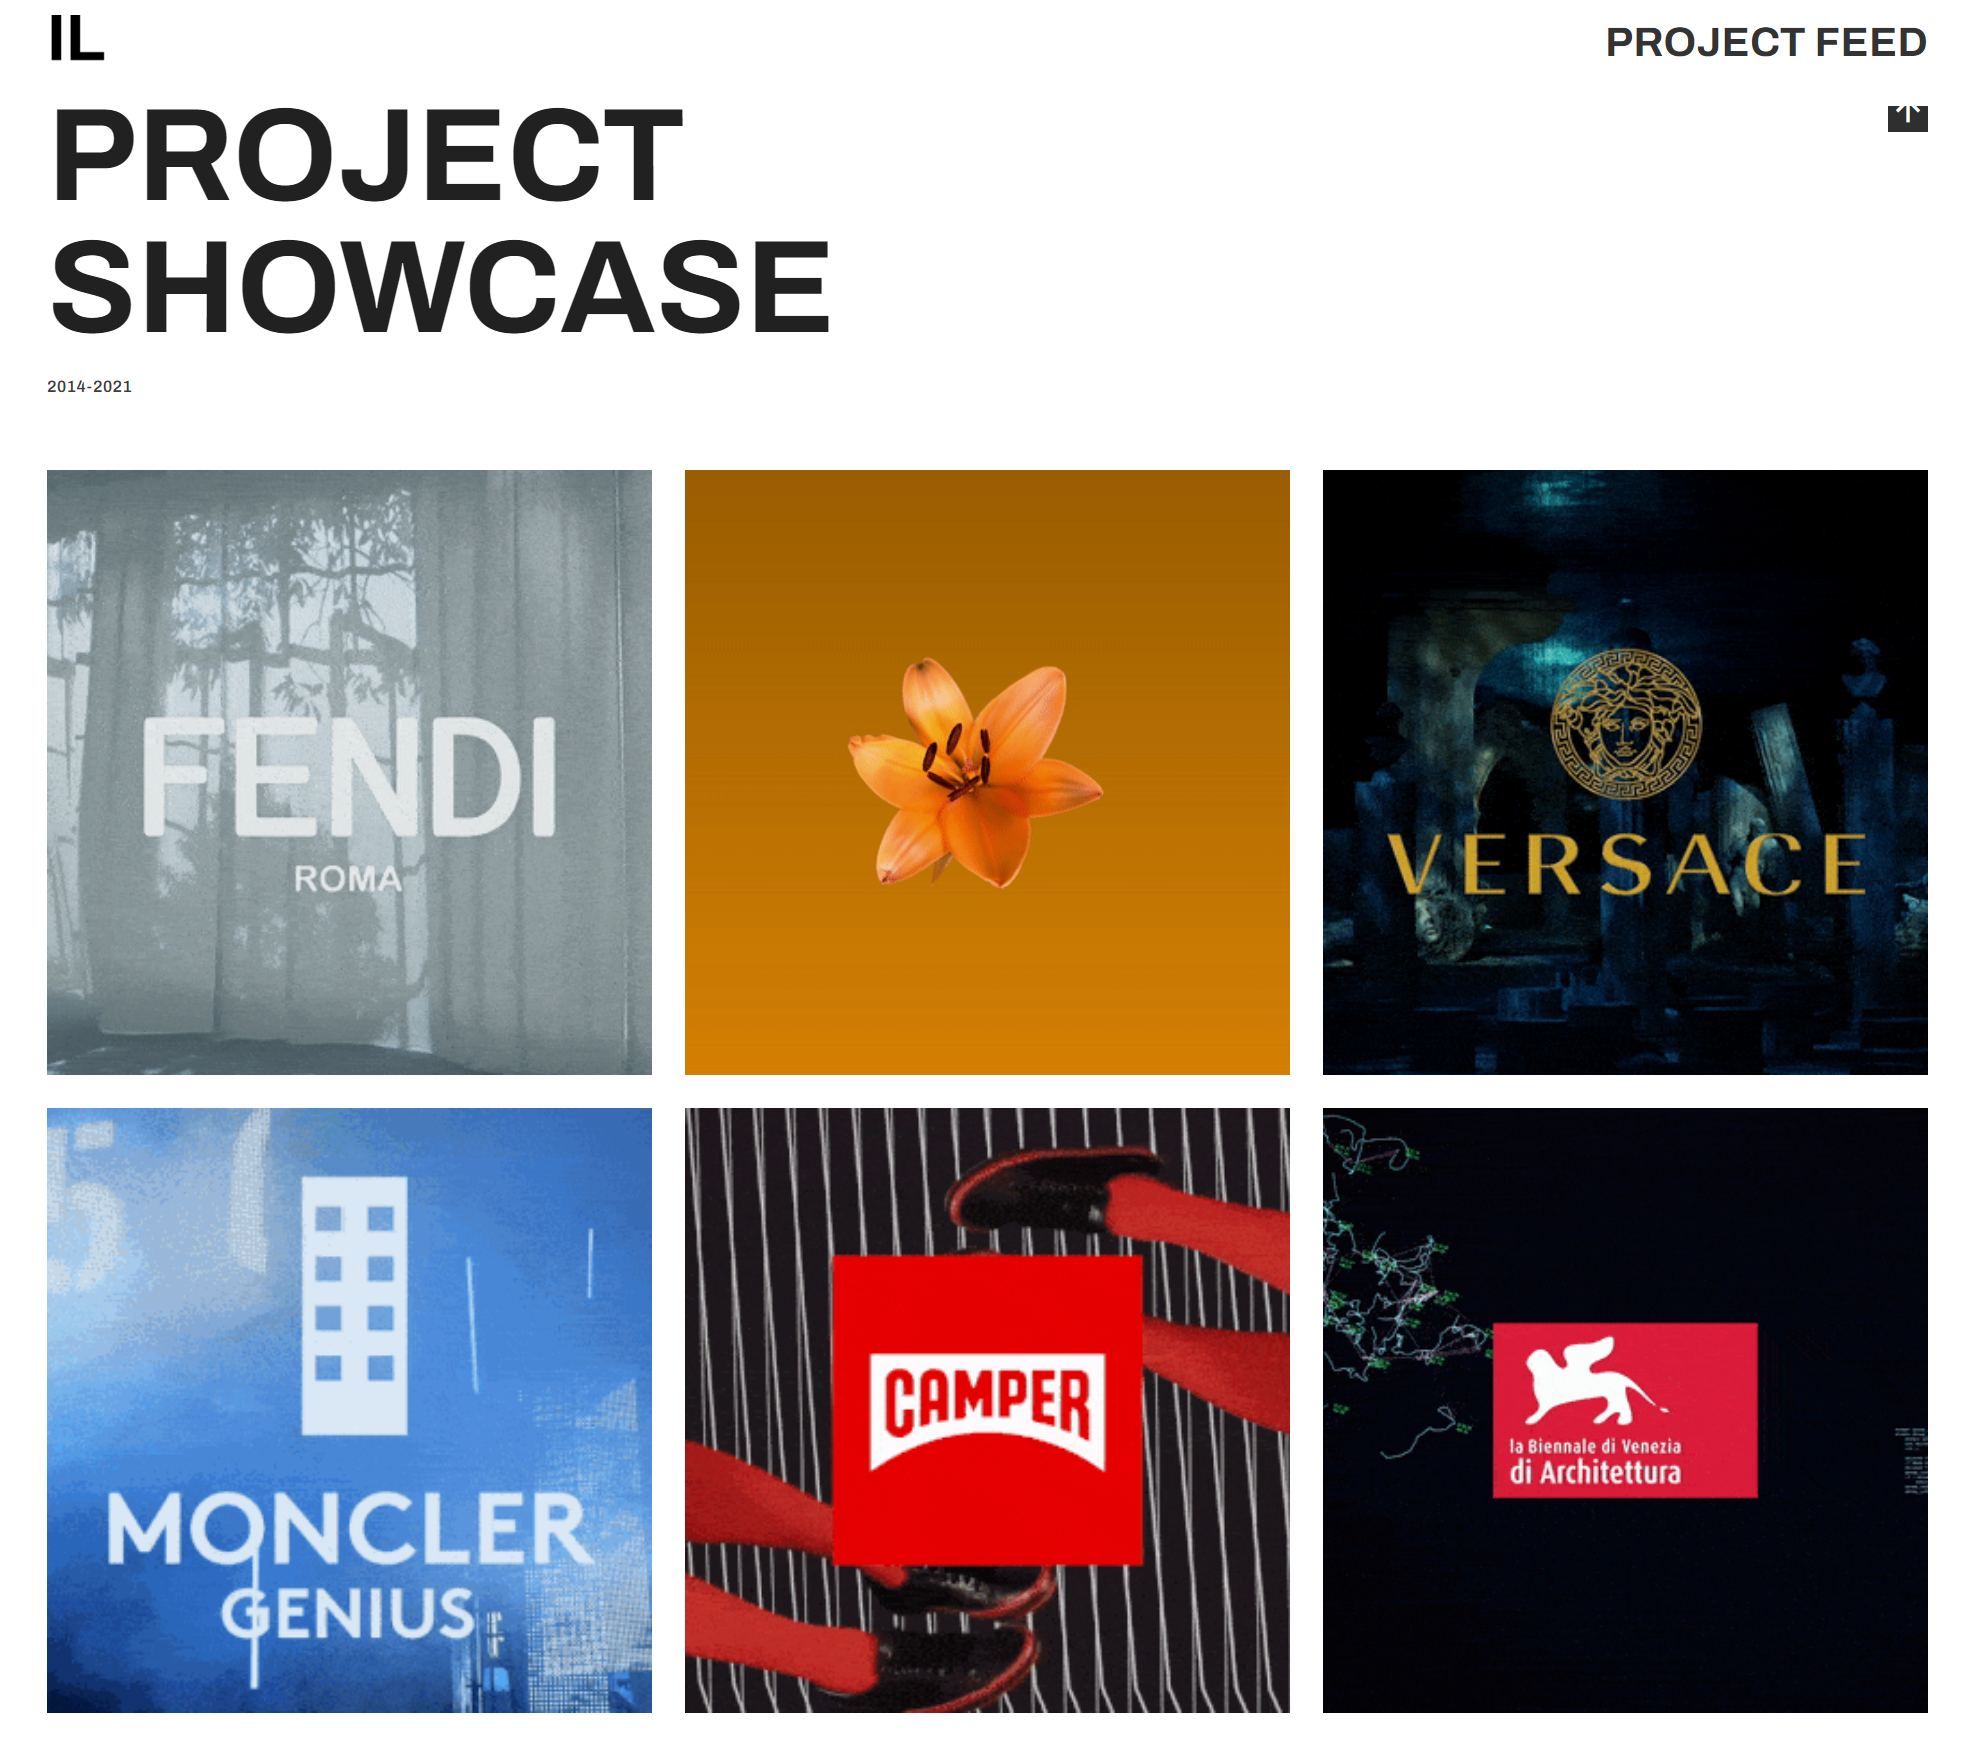 PROJECT FEED

PROJECT "
SHOWCASE

VERSACI